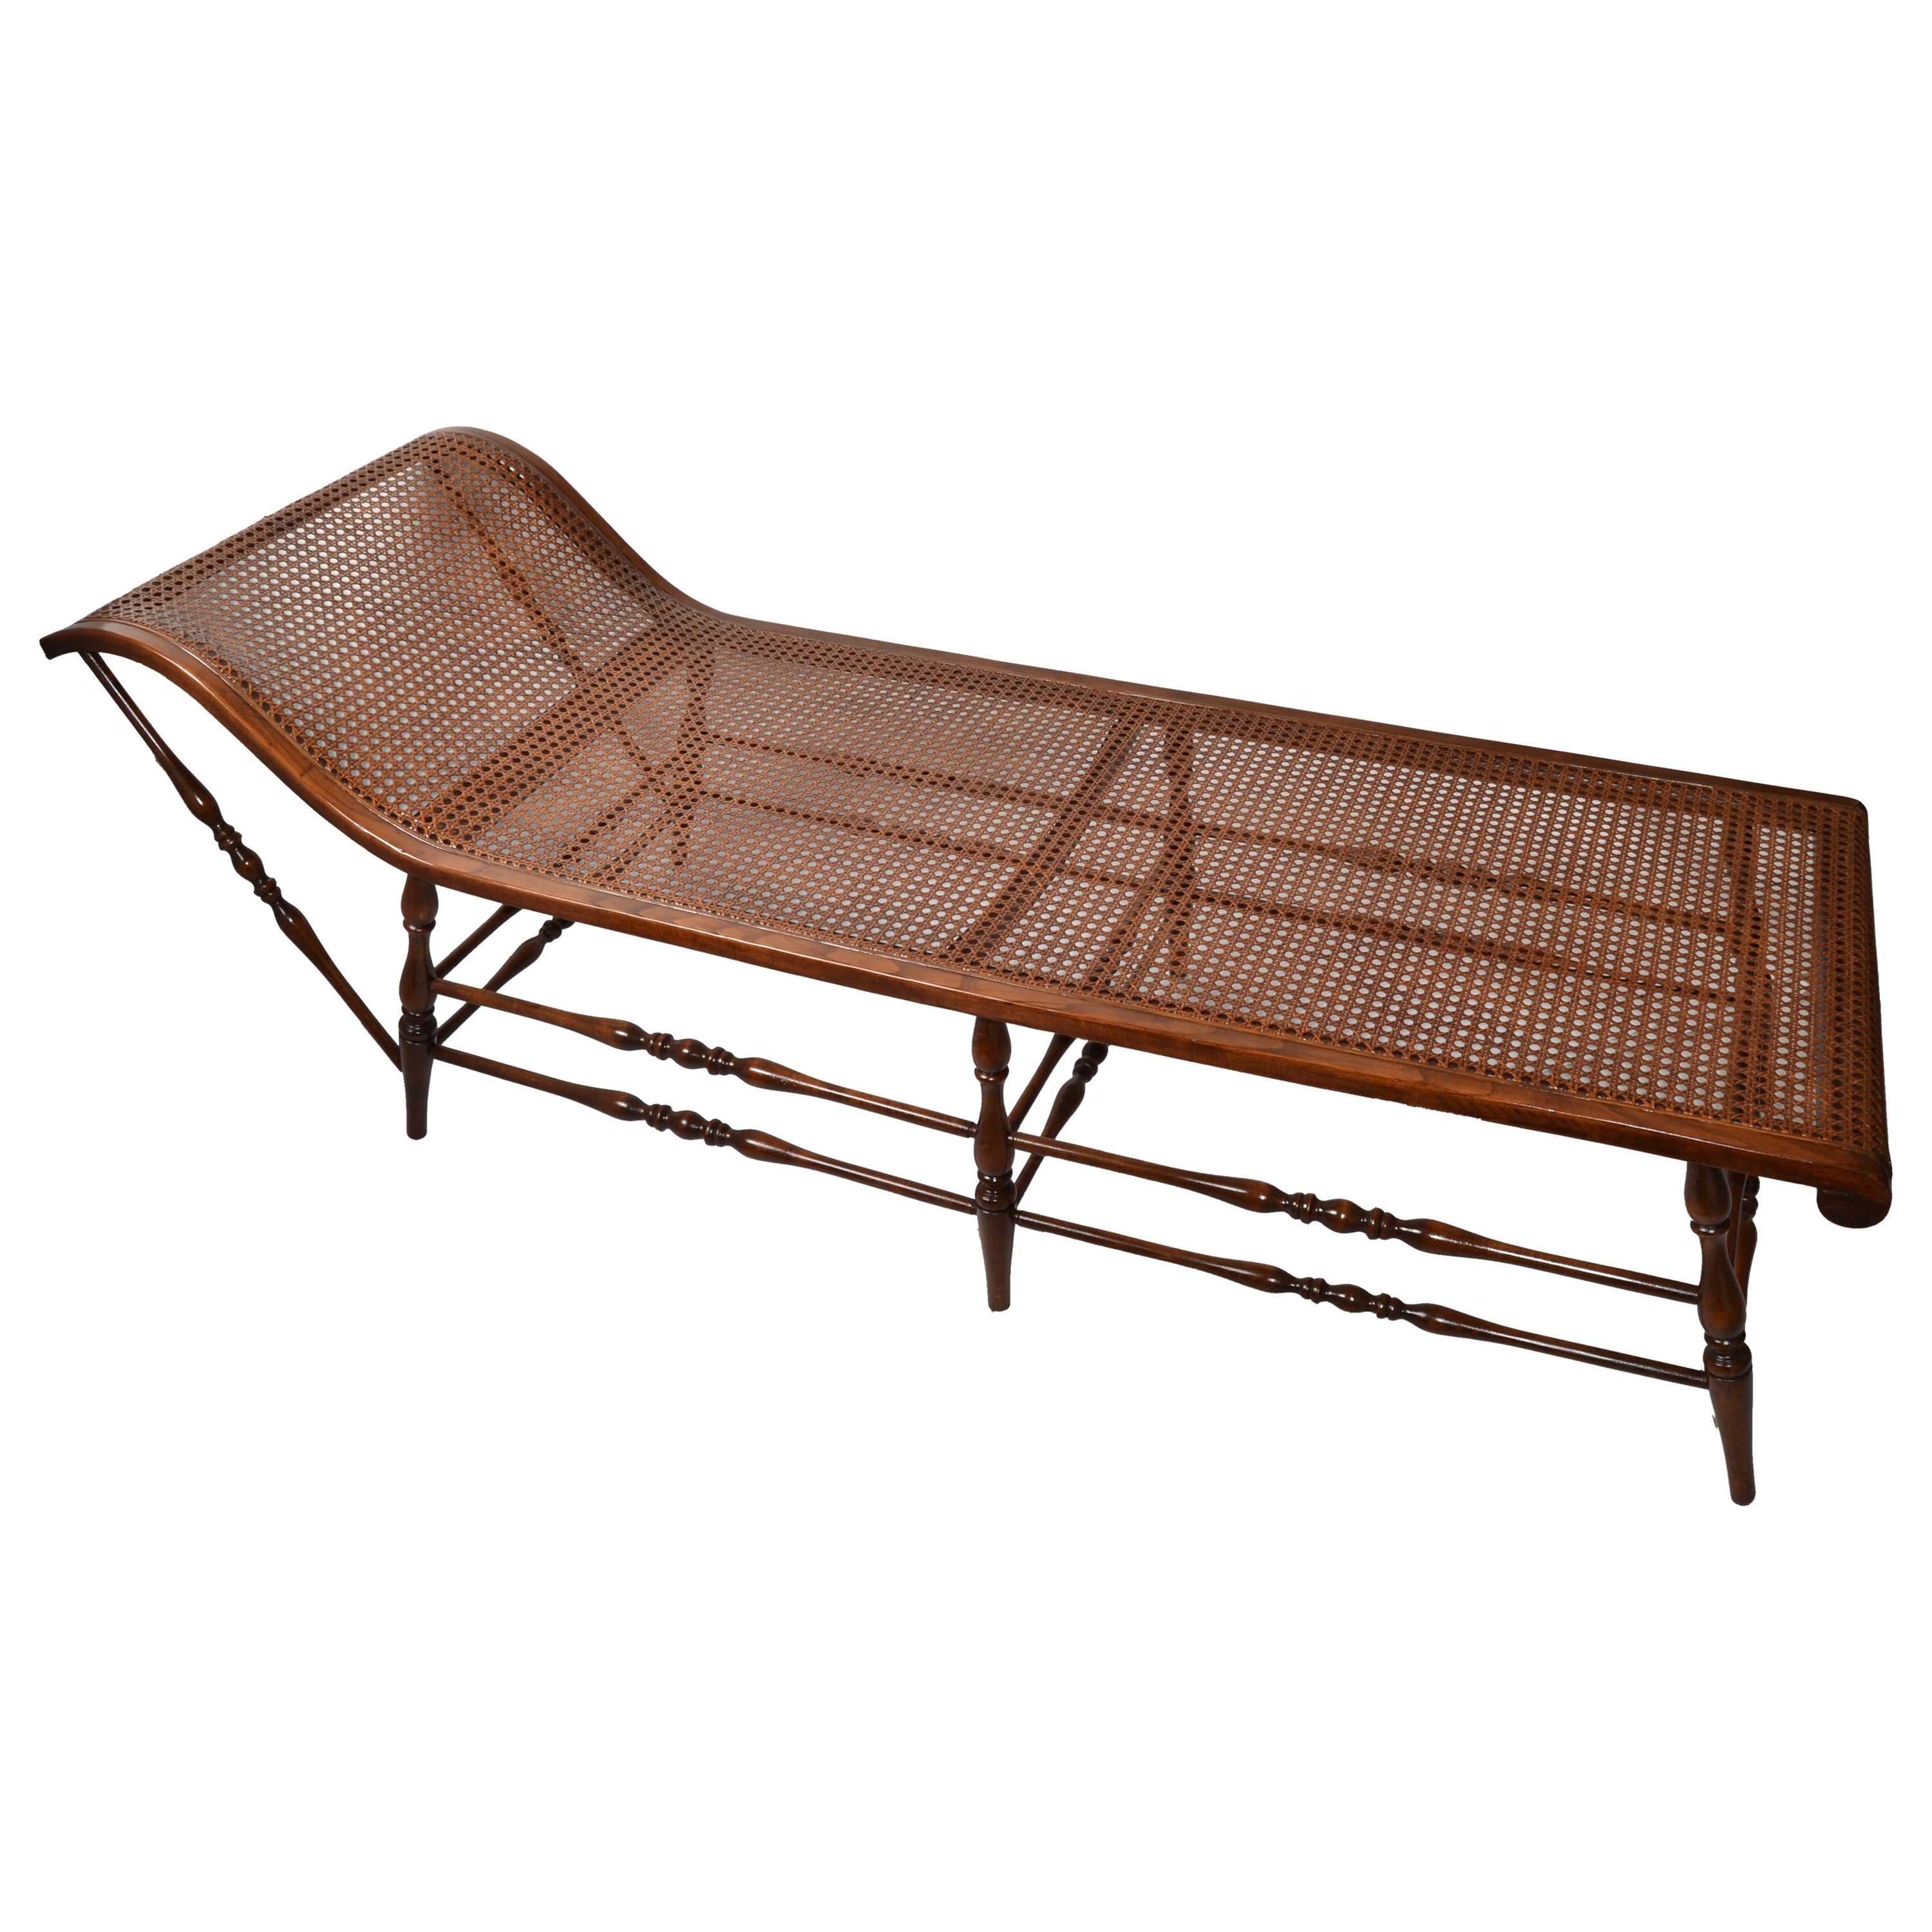 British Colonial Handwoven Cane Turned Wood Spindle Frame Chaise Lounge Daybed For Sale